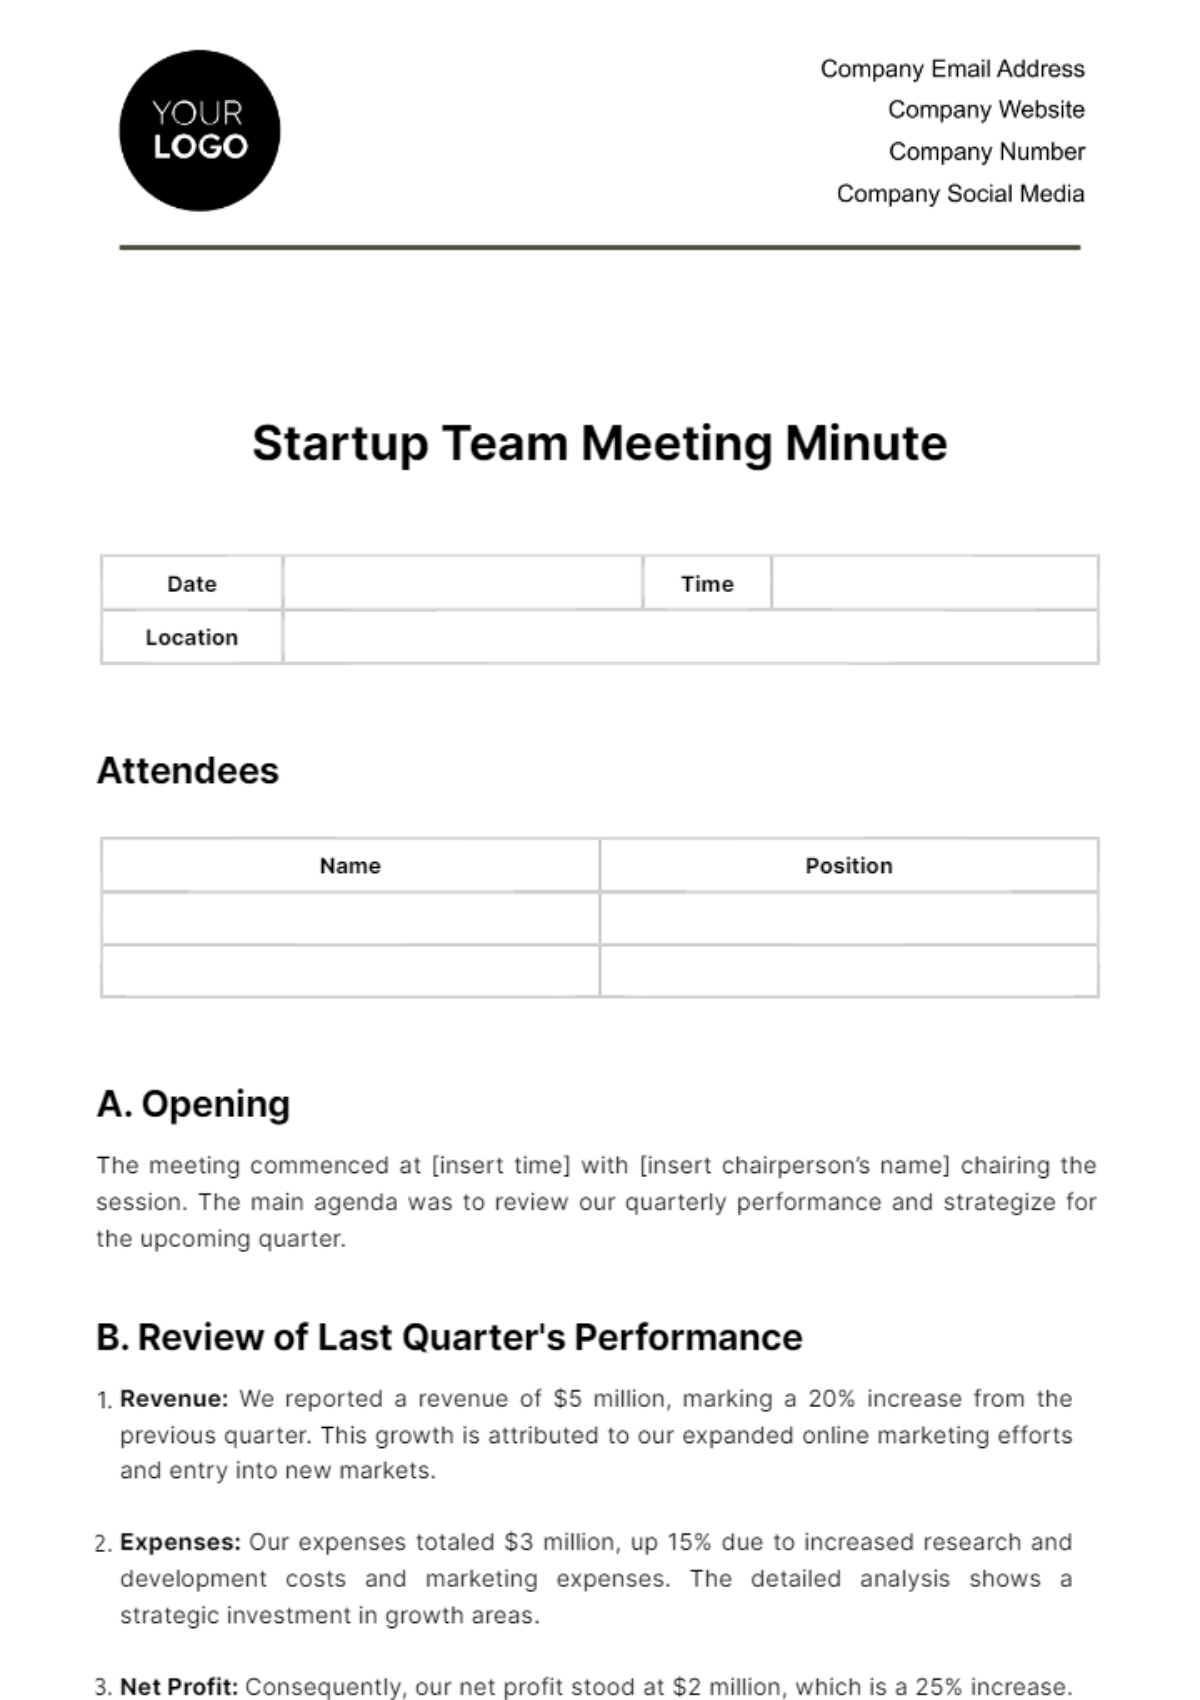 Free Startup Team Meeting Minute Template